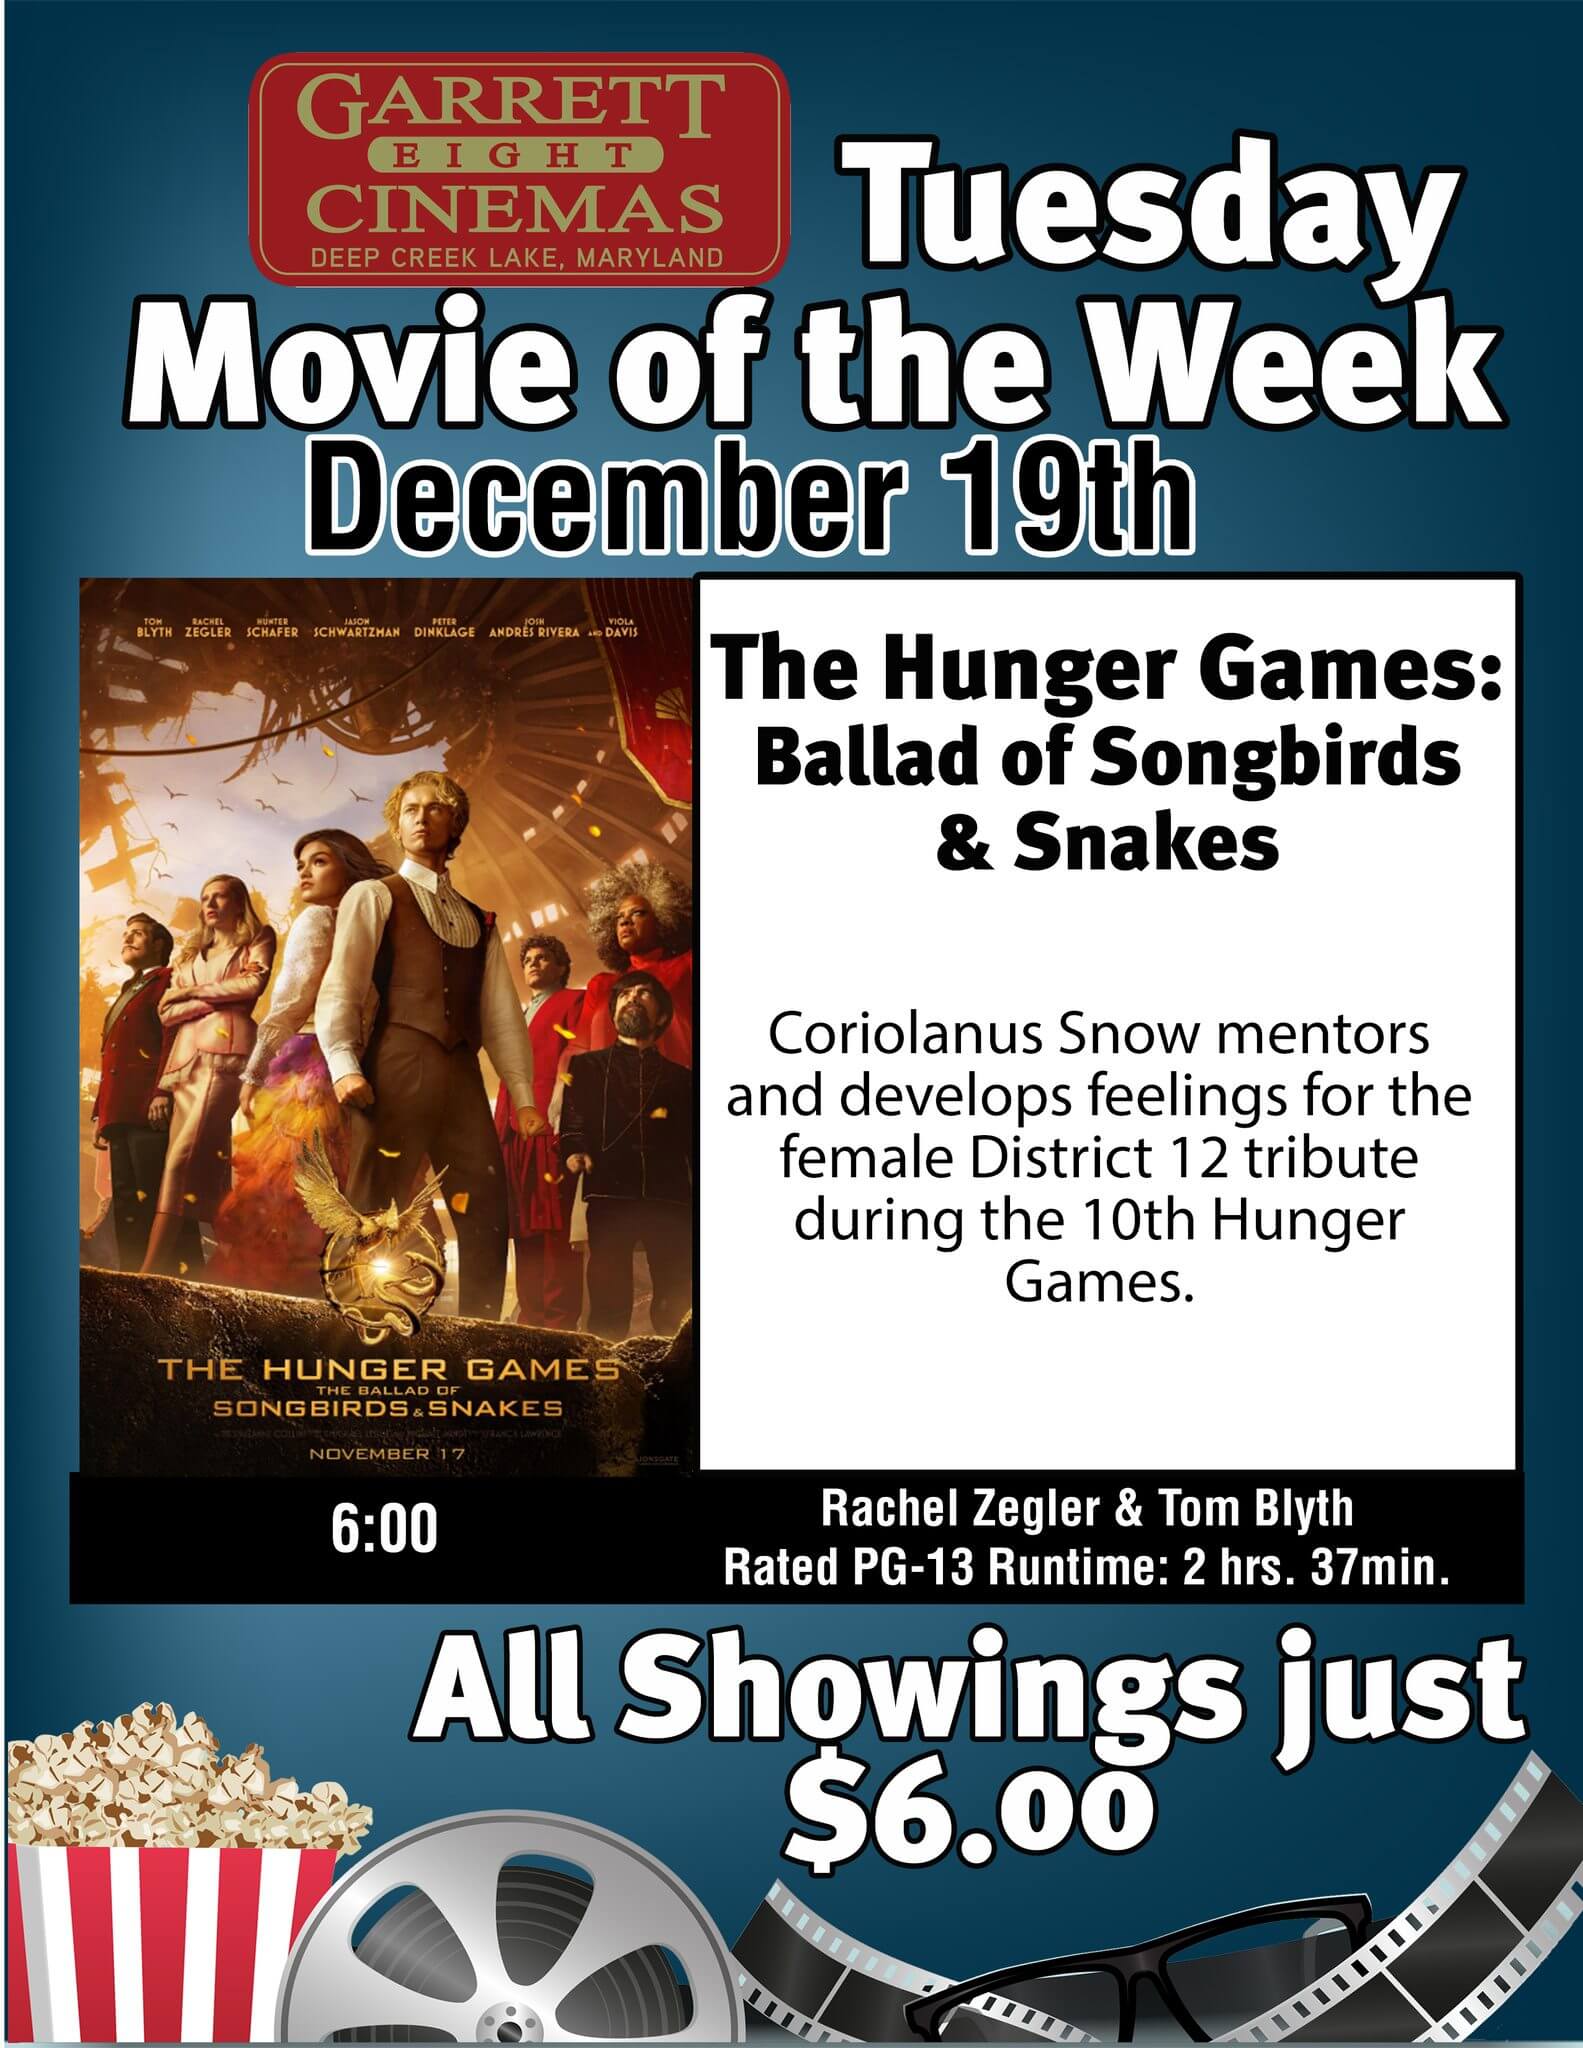 Tuesday Movie of the Week: The Hunger Games - Ballad of Songbirds & Snakes at Deep Creek Lake, MD